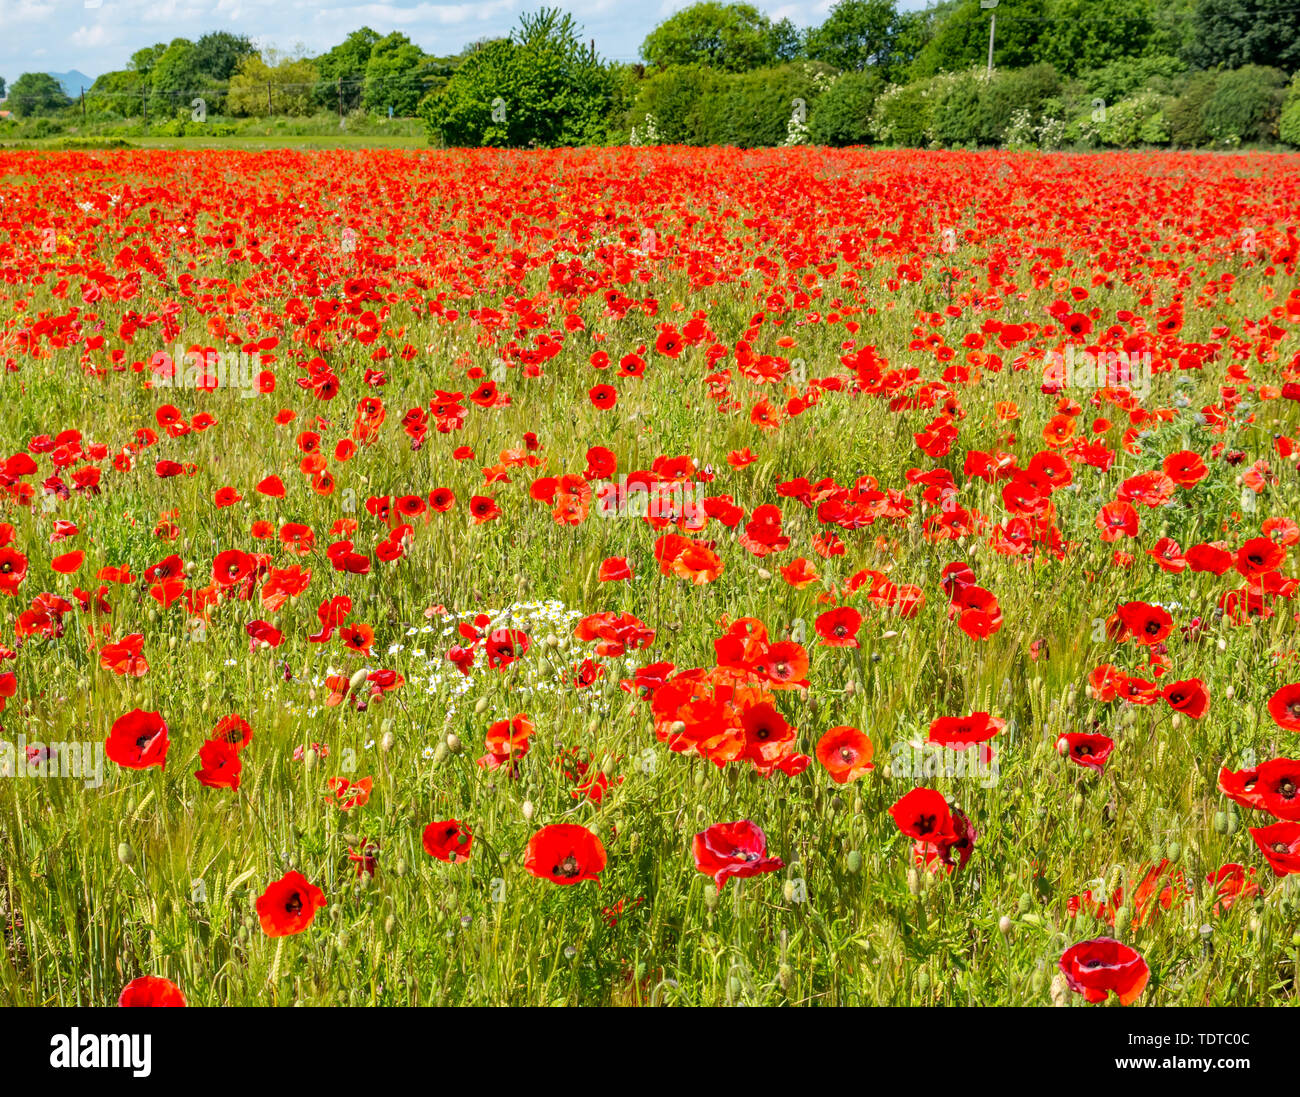 East Lothian, Scotland, United Kingdom, 19th June 2019. UK Weather: The recent wet and sunny weather has been just right for encouraging the growth of poppies which have flowered abundantly across the county. Red poppies, common poppy, Flanders poppy, field poppy or corn rose poppies in a field Stock Photo